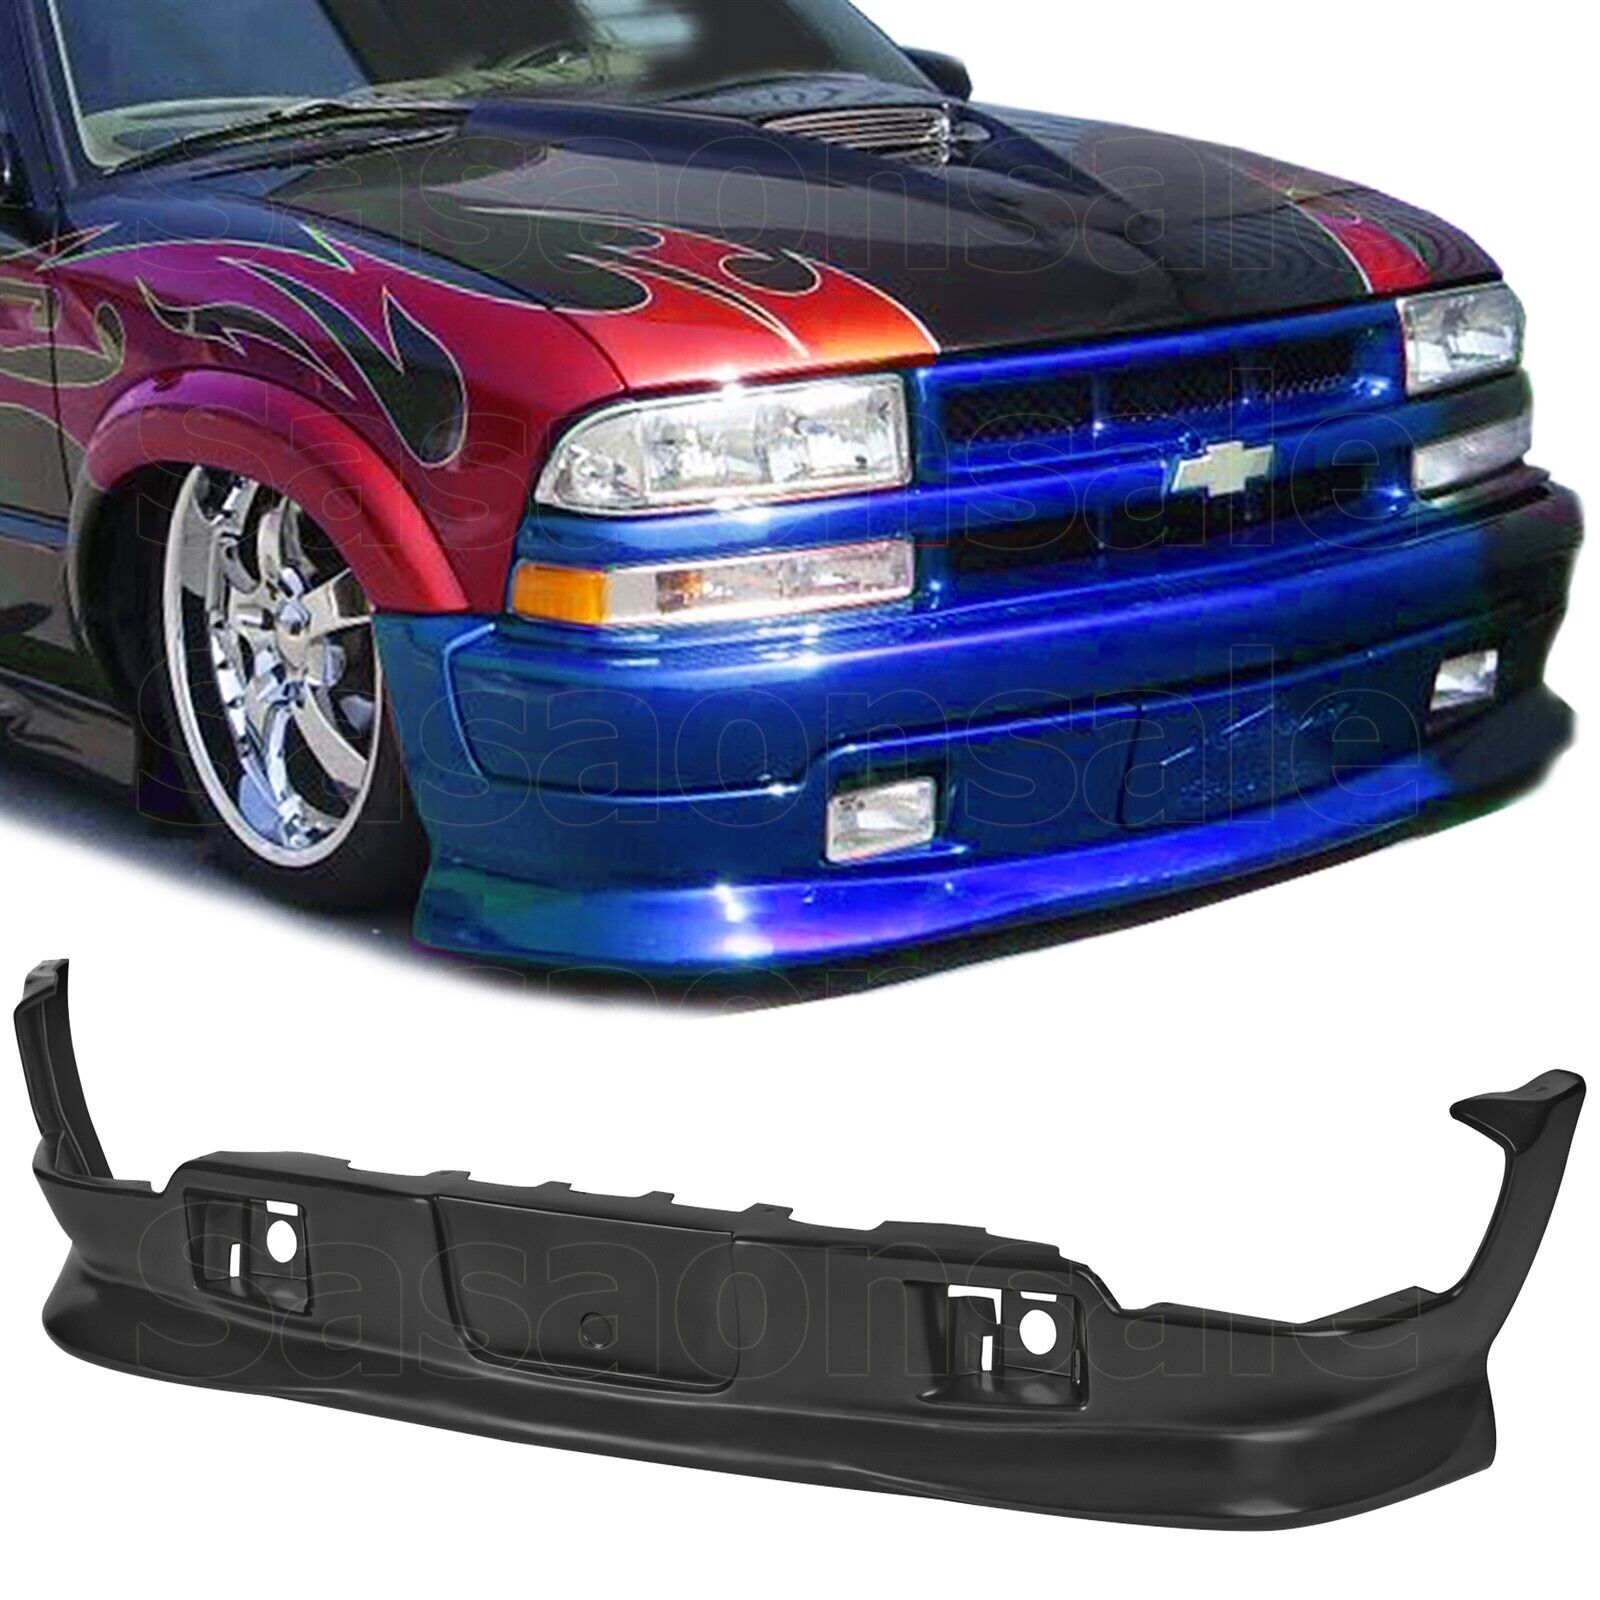 [SASA] Made for 1998-2004 Chevy S10 GMC Sonoma Pickup Xtreme PU Front Bumper Lip